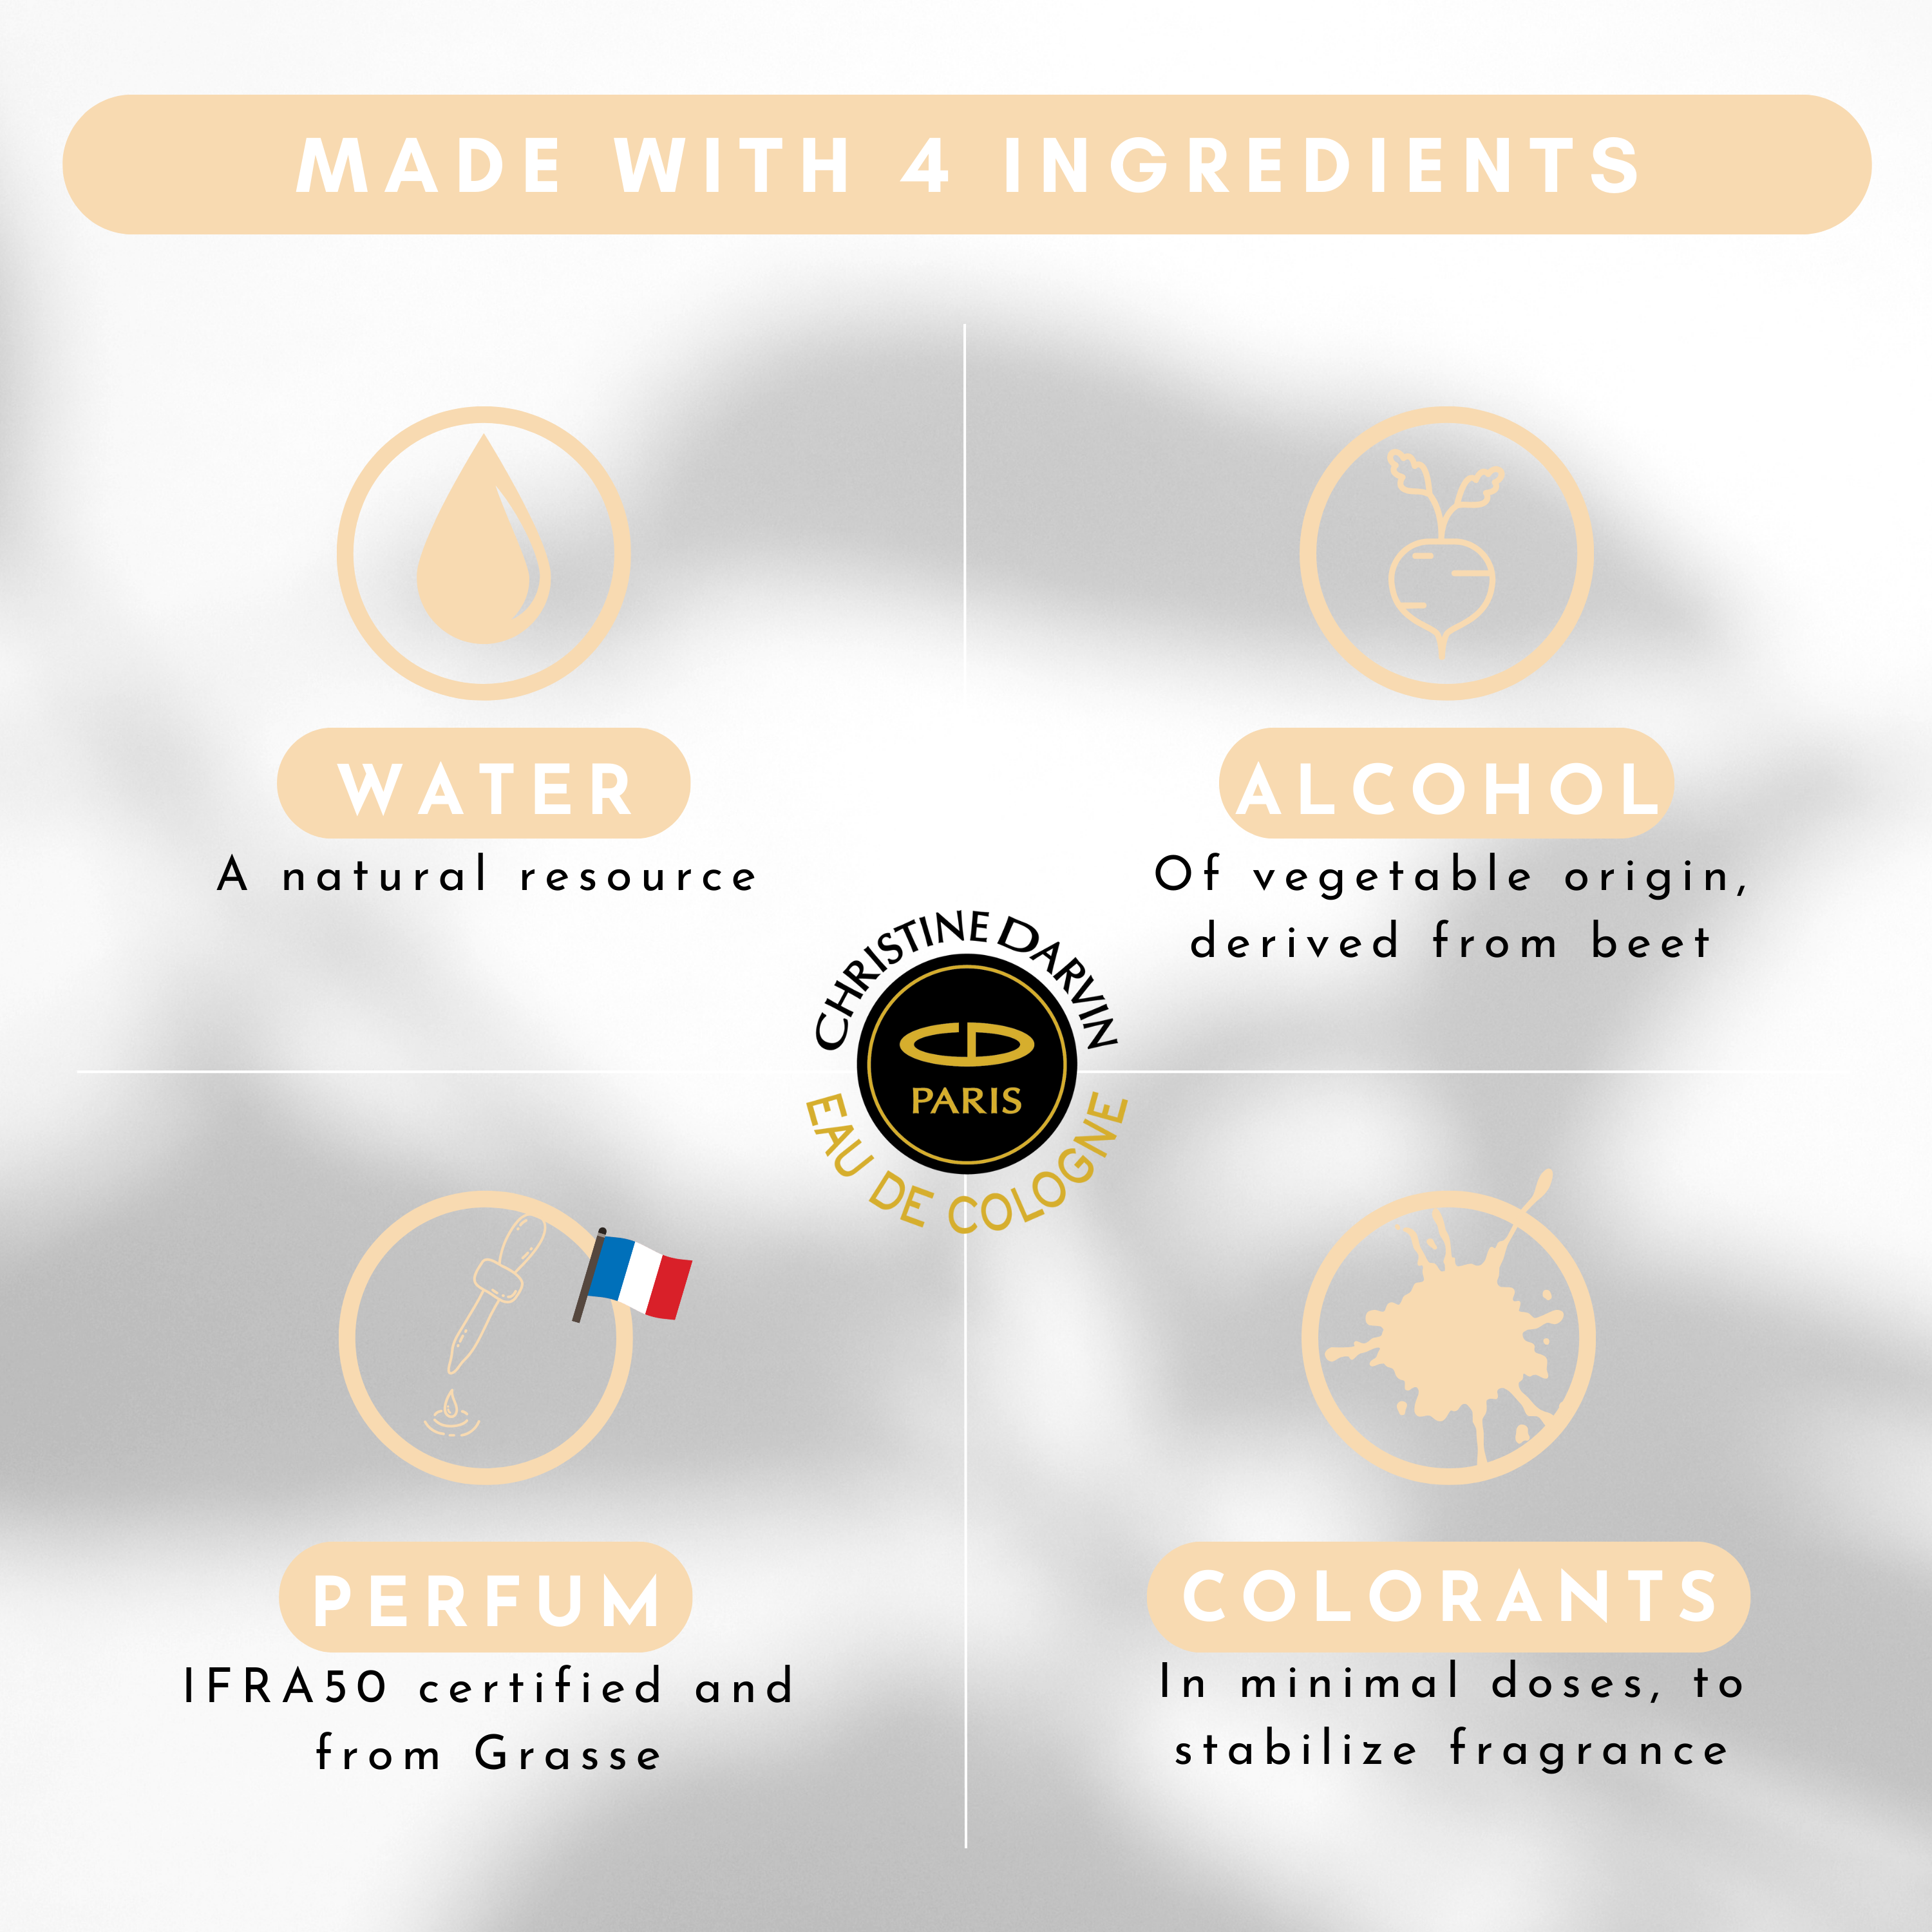 Ingredients eau de Cologne fragrance Musk White 97% natural origin and 100% French